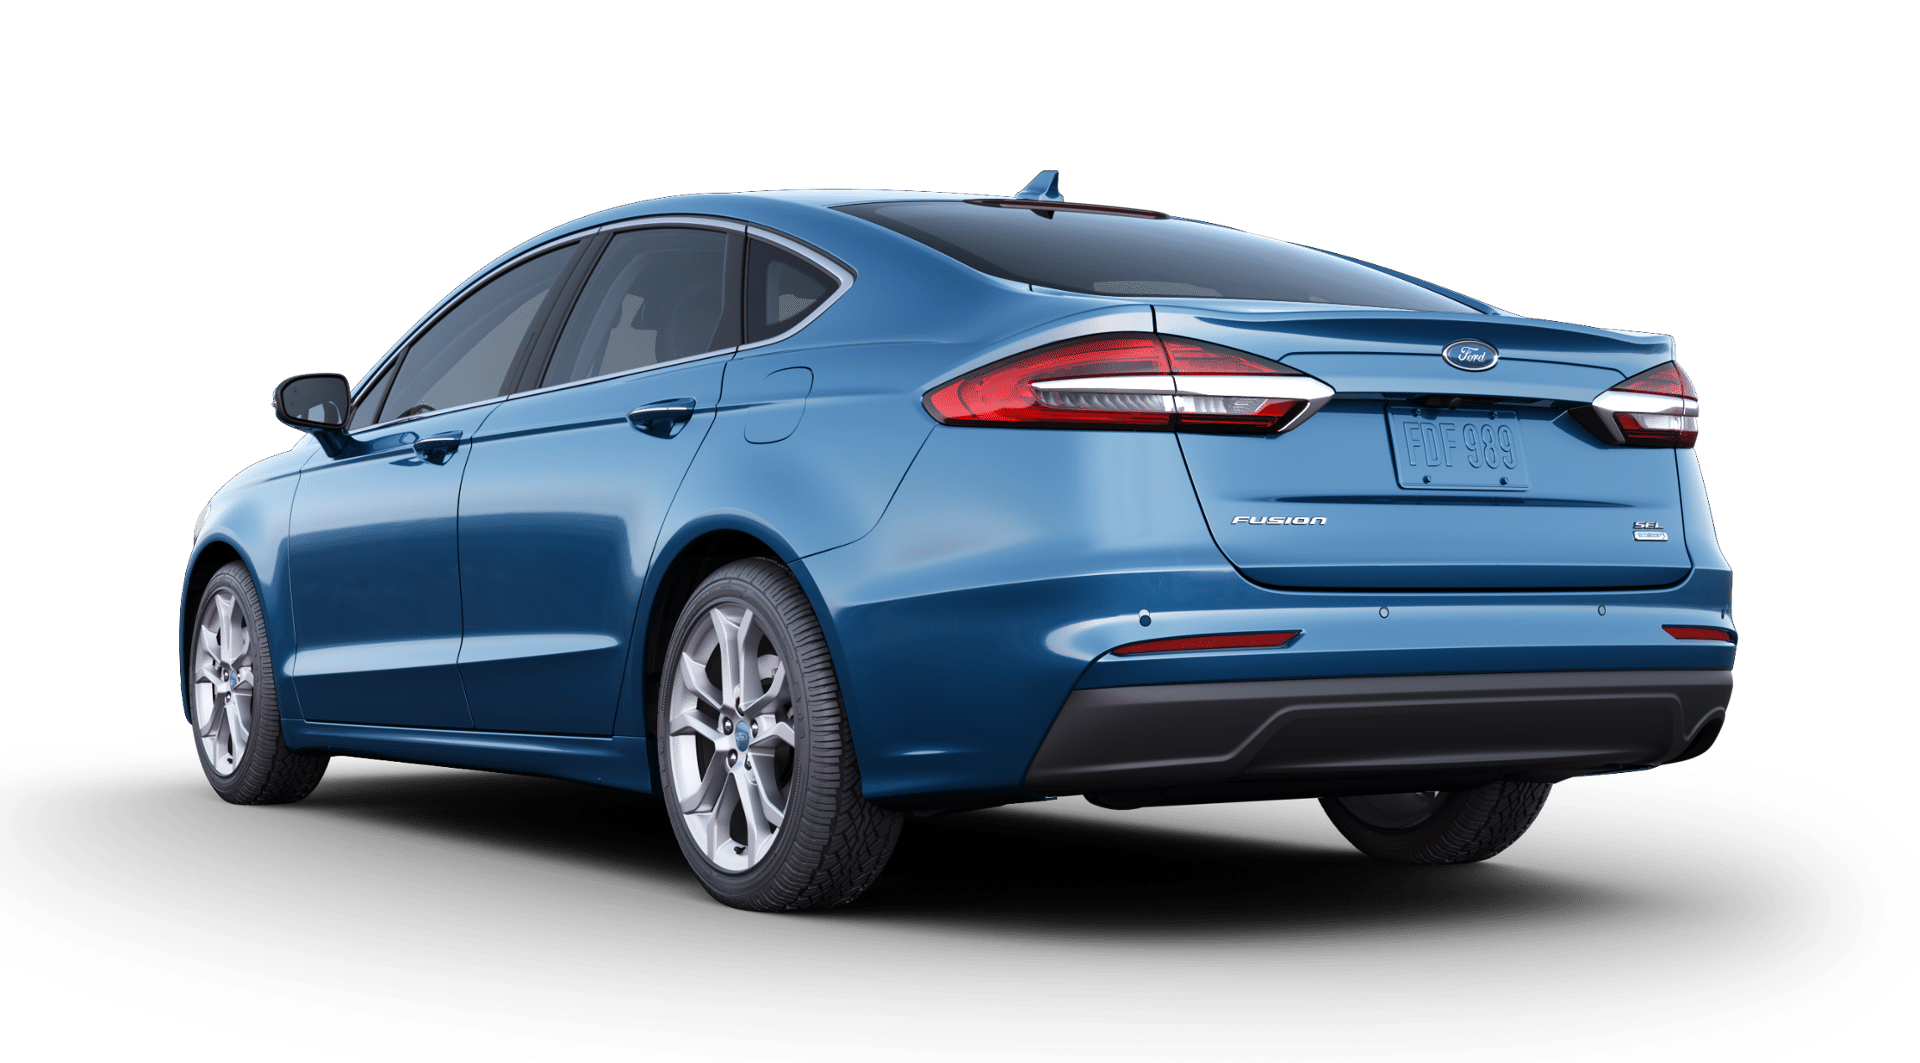 New Velocity Blue Color For The 2019 Ford Fusion First Look